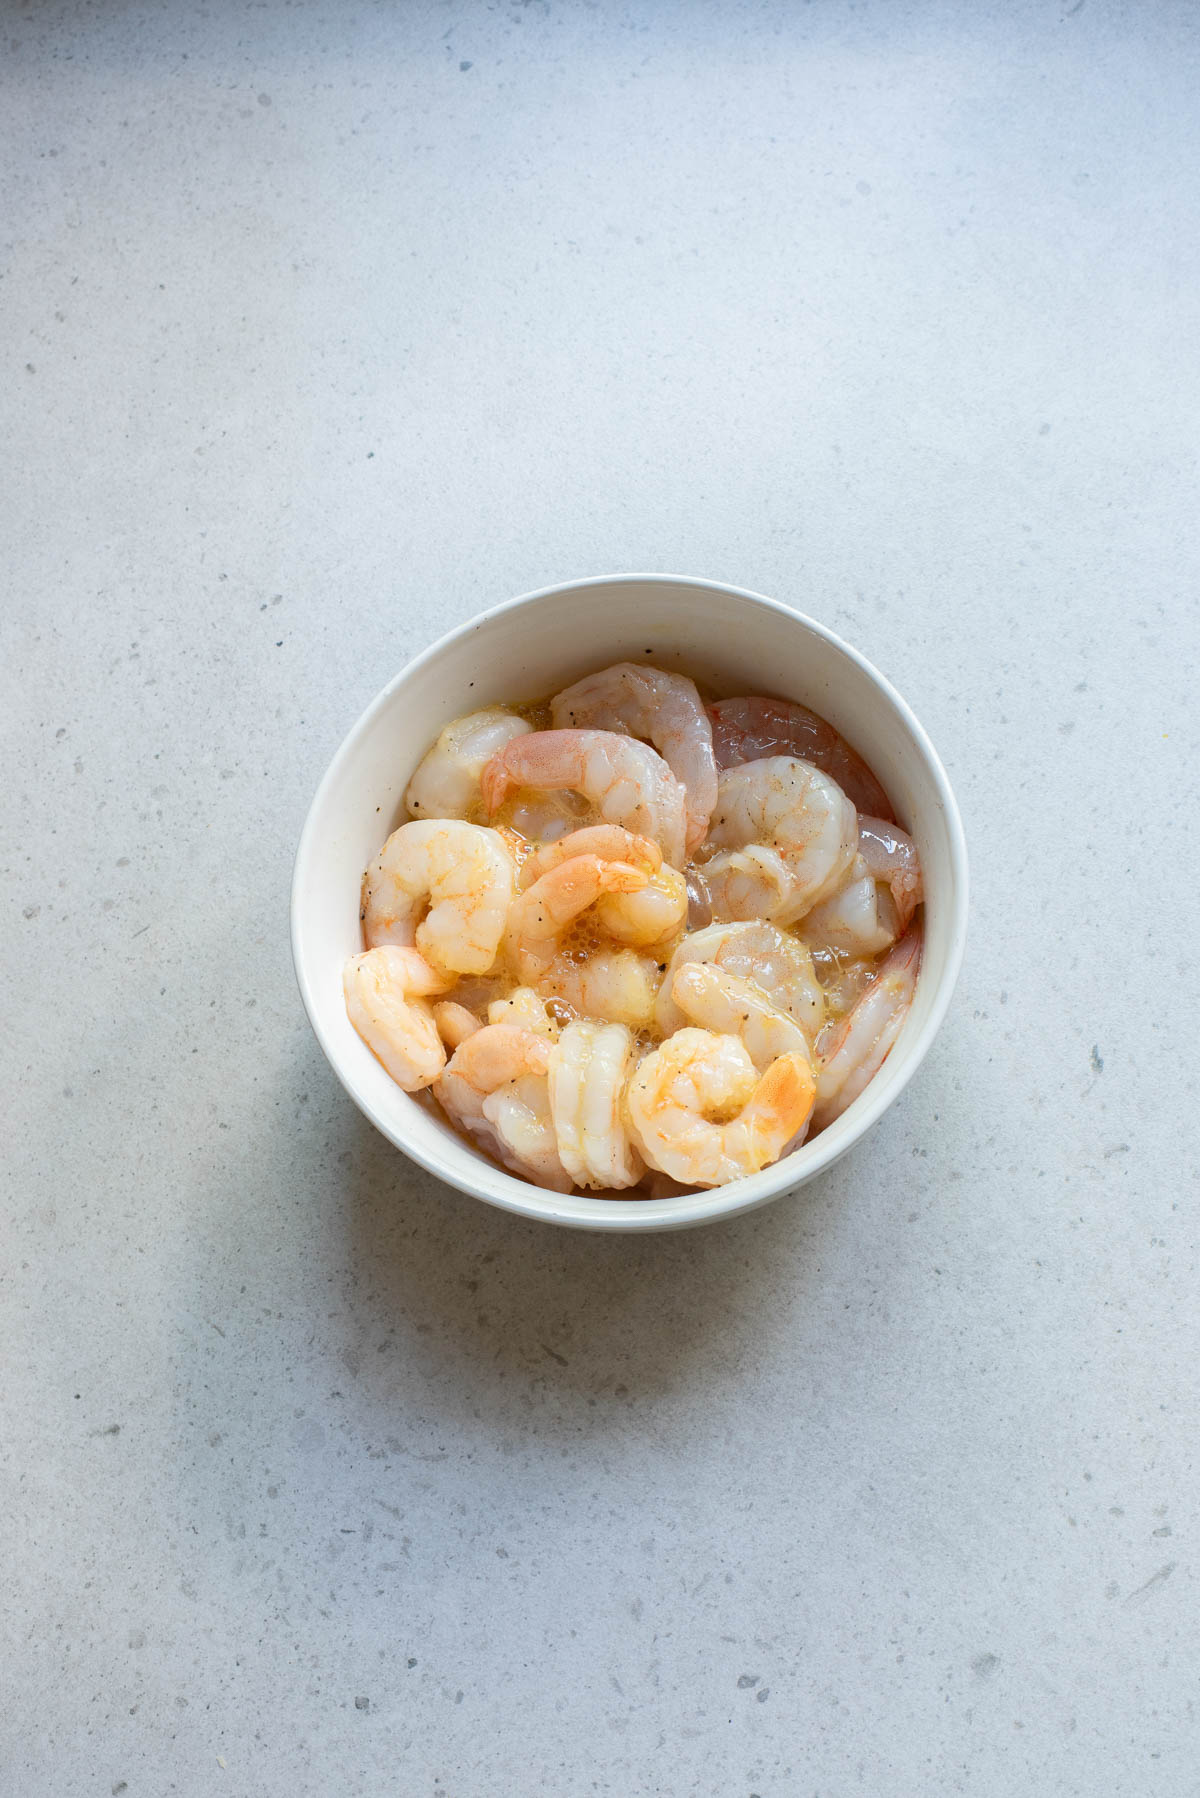 raw shrimp in a white bowl on counter.